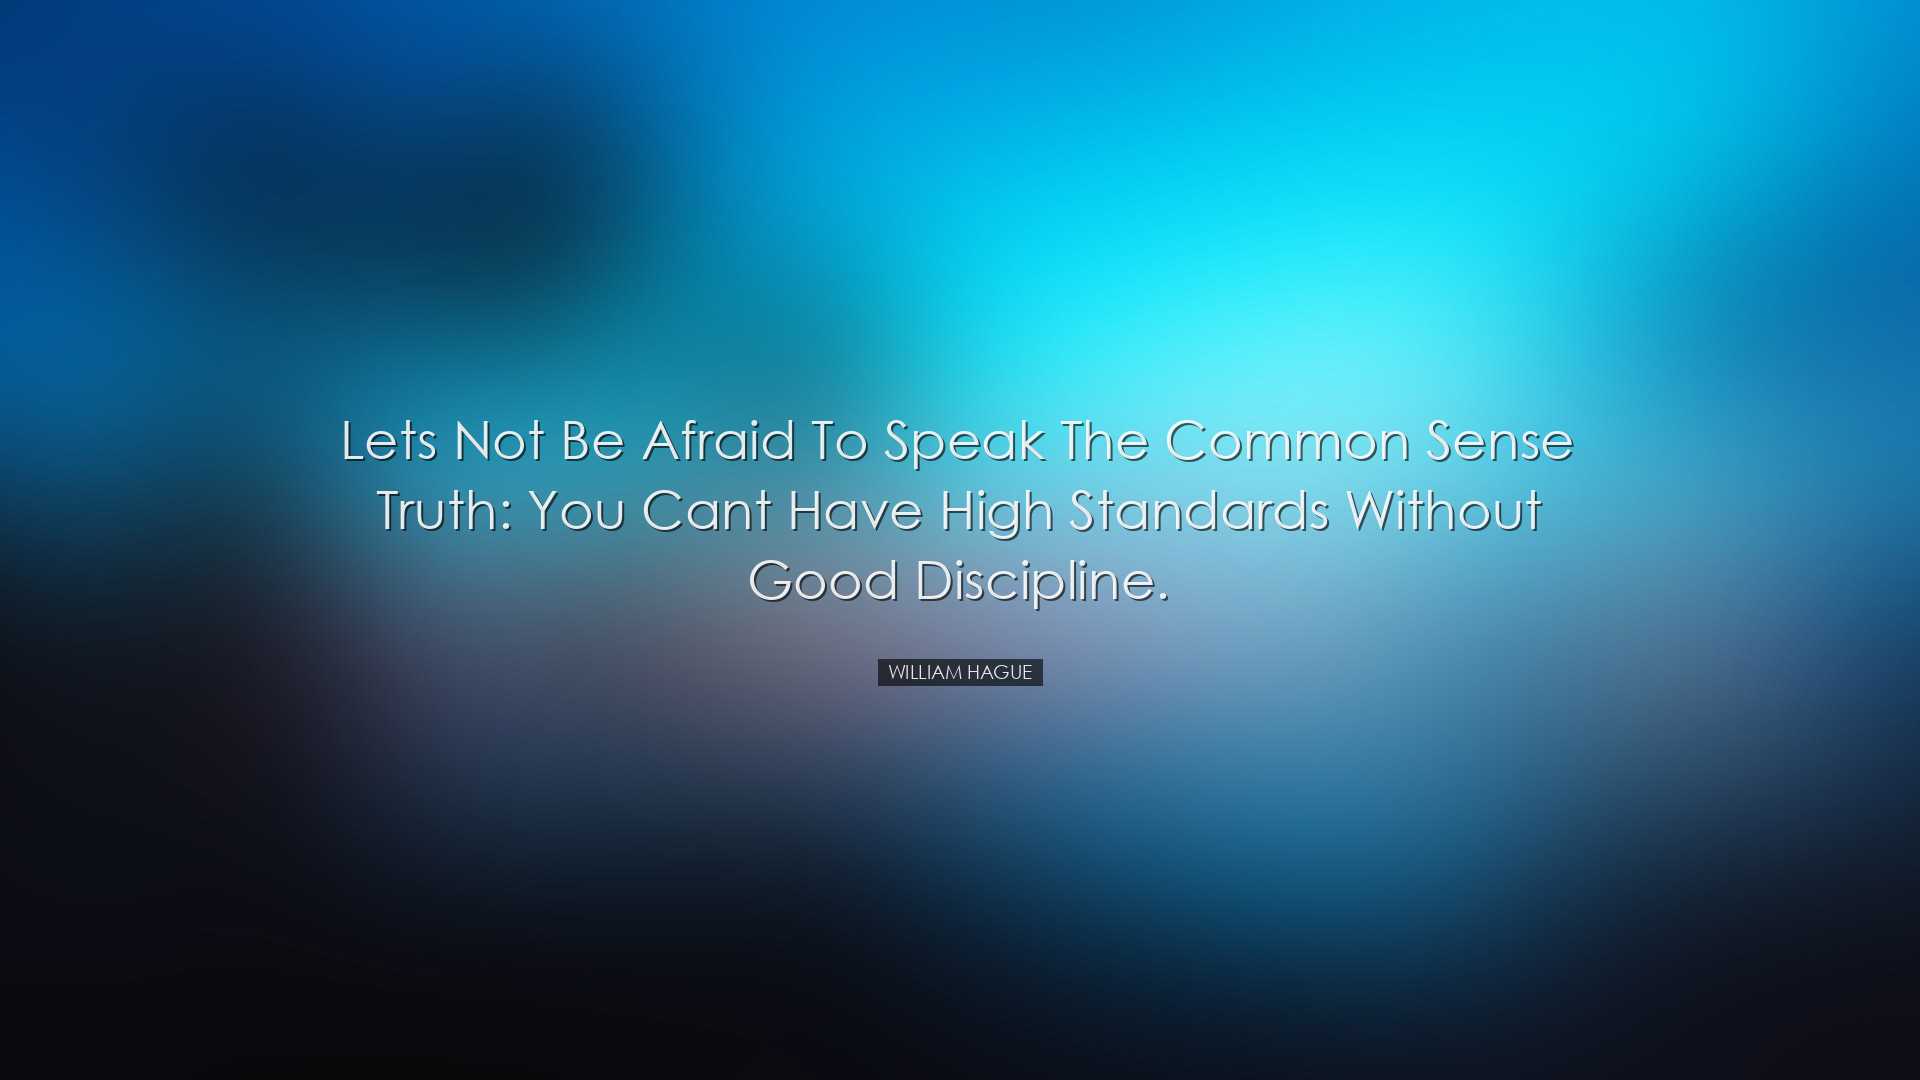 Lets not be afraid to speak the common sense truth: you cant have